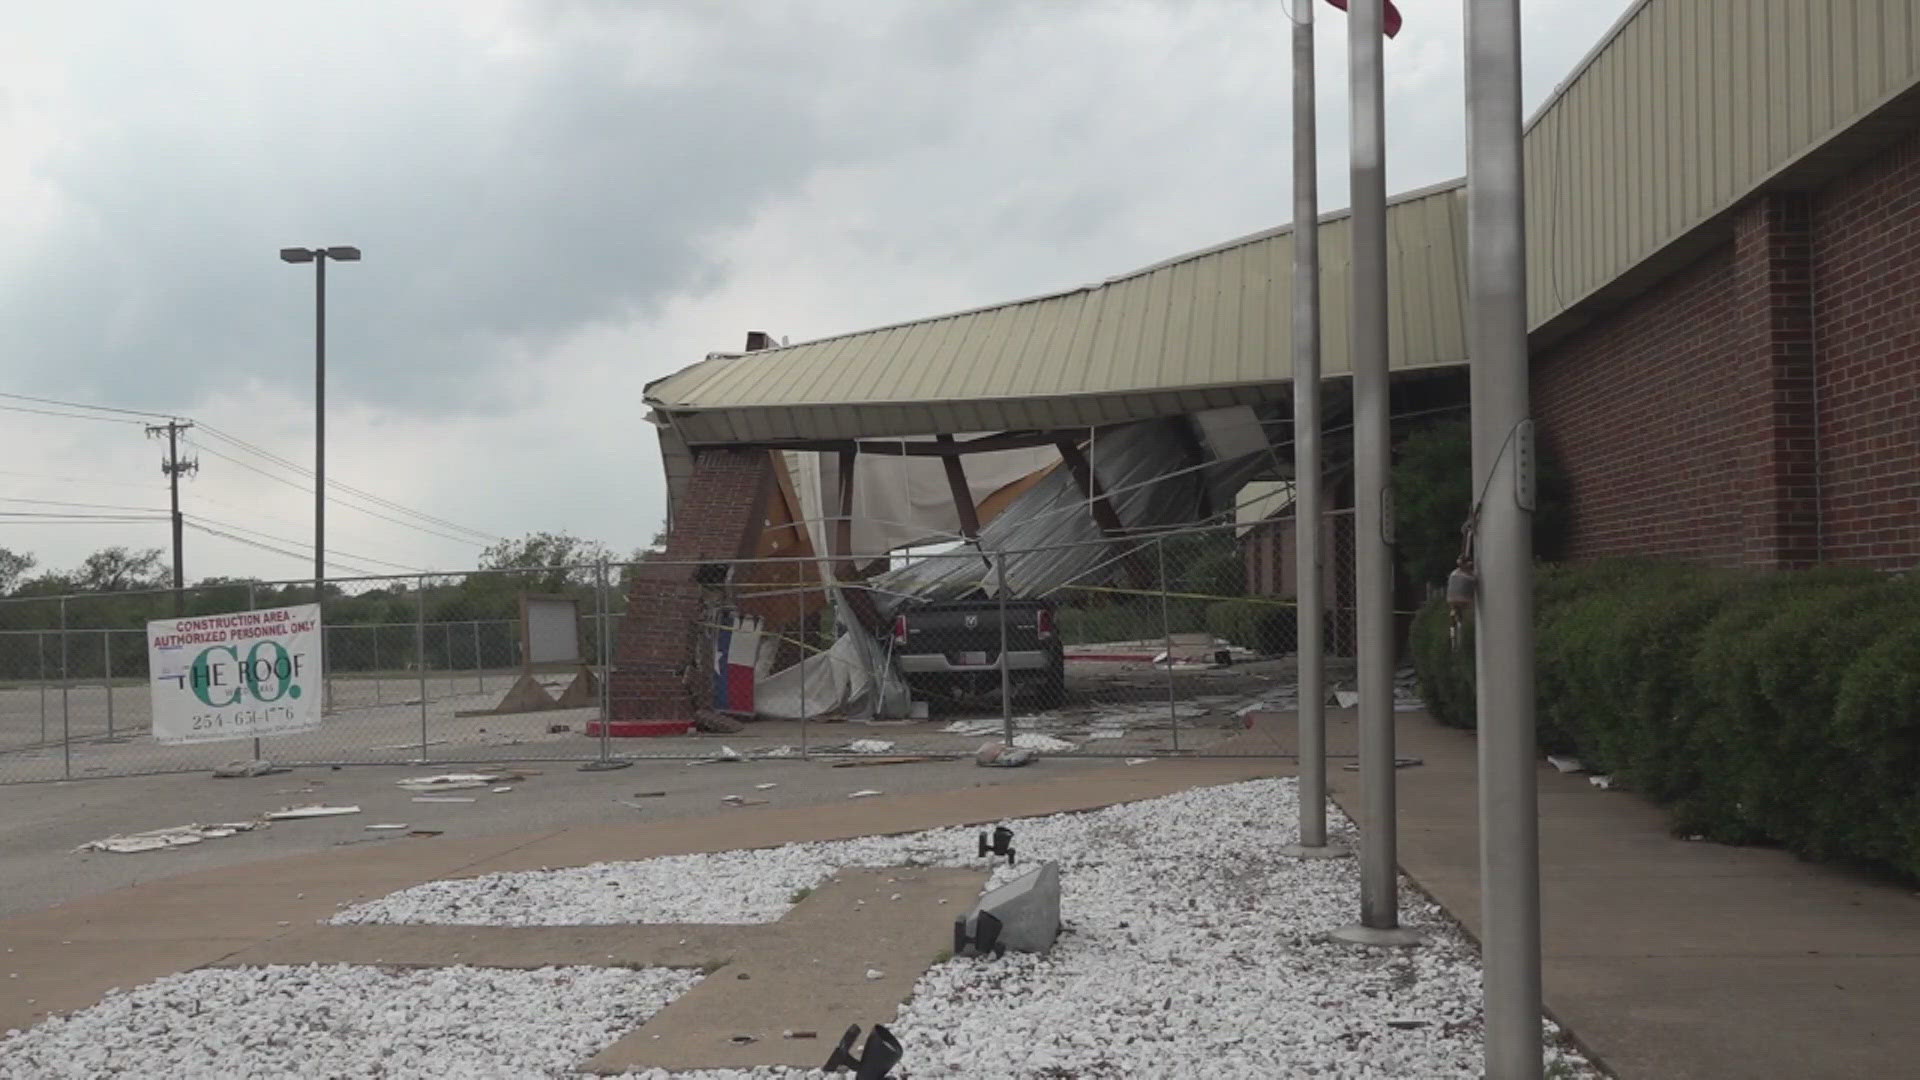 An EF-2 tornado tore down the awning of the building on May 22 while patrons were inside.